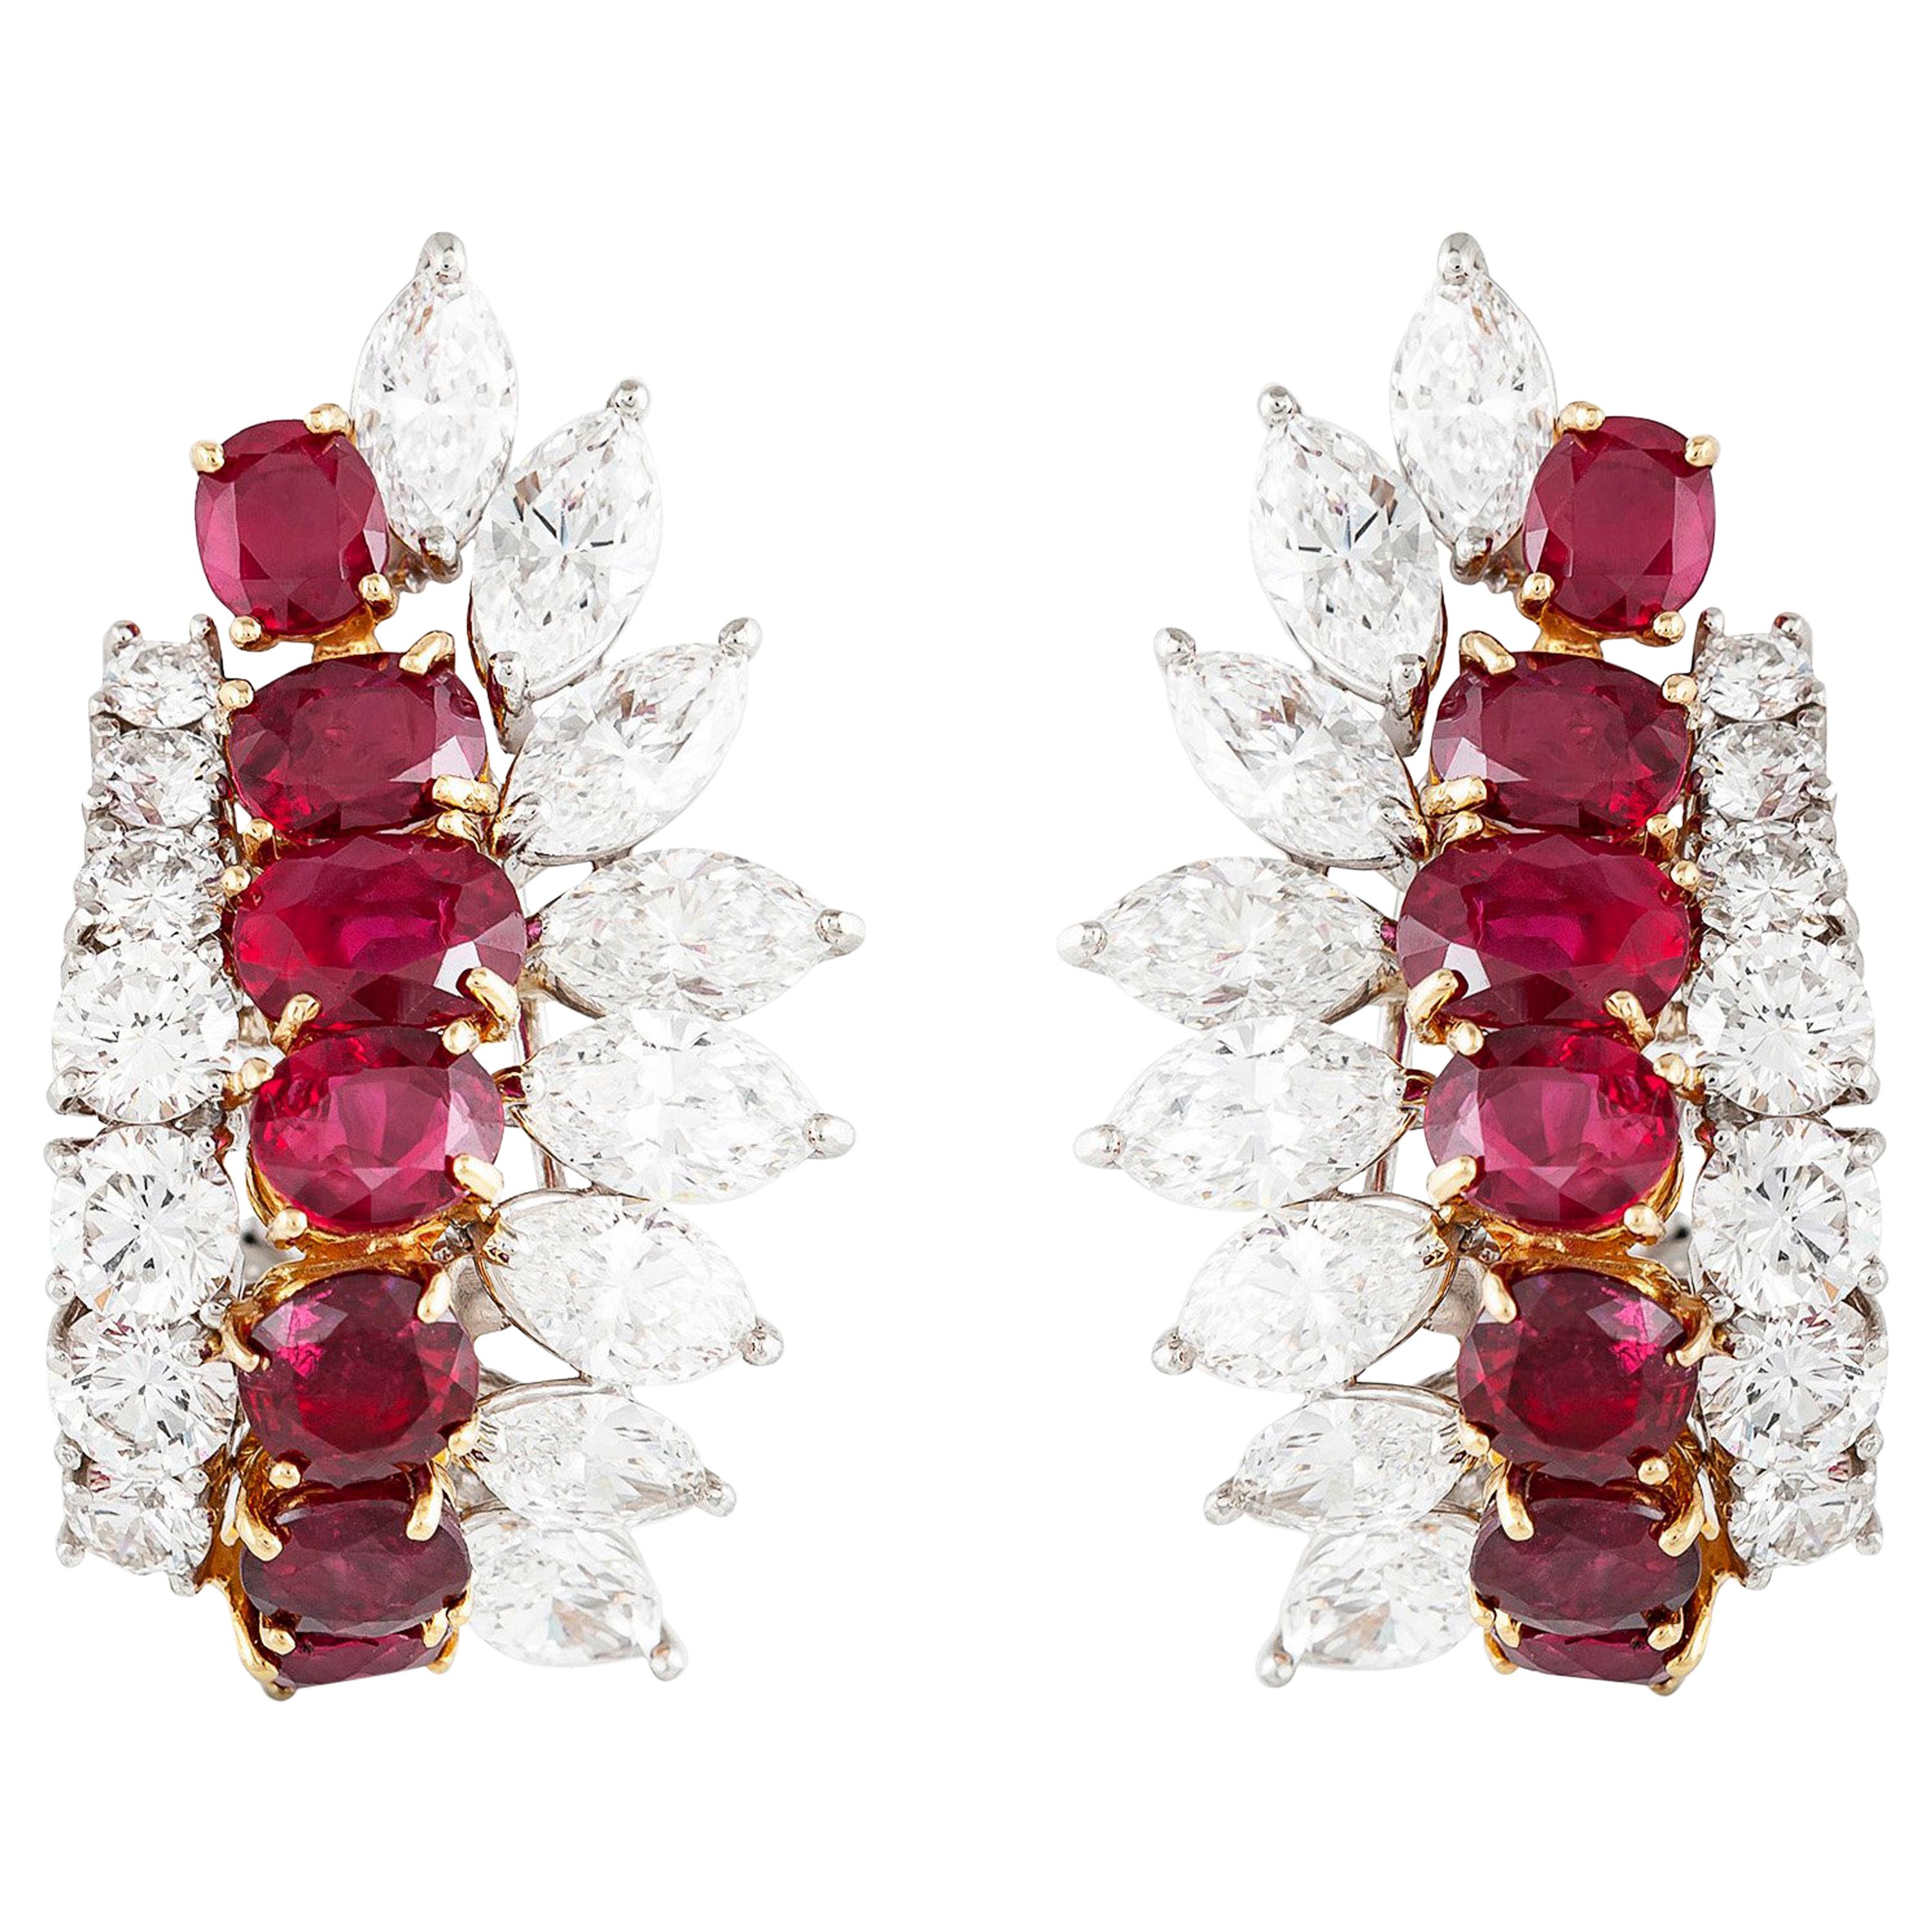 Cartier Diamond and Ruby Cluster Earrings